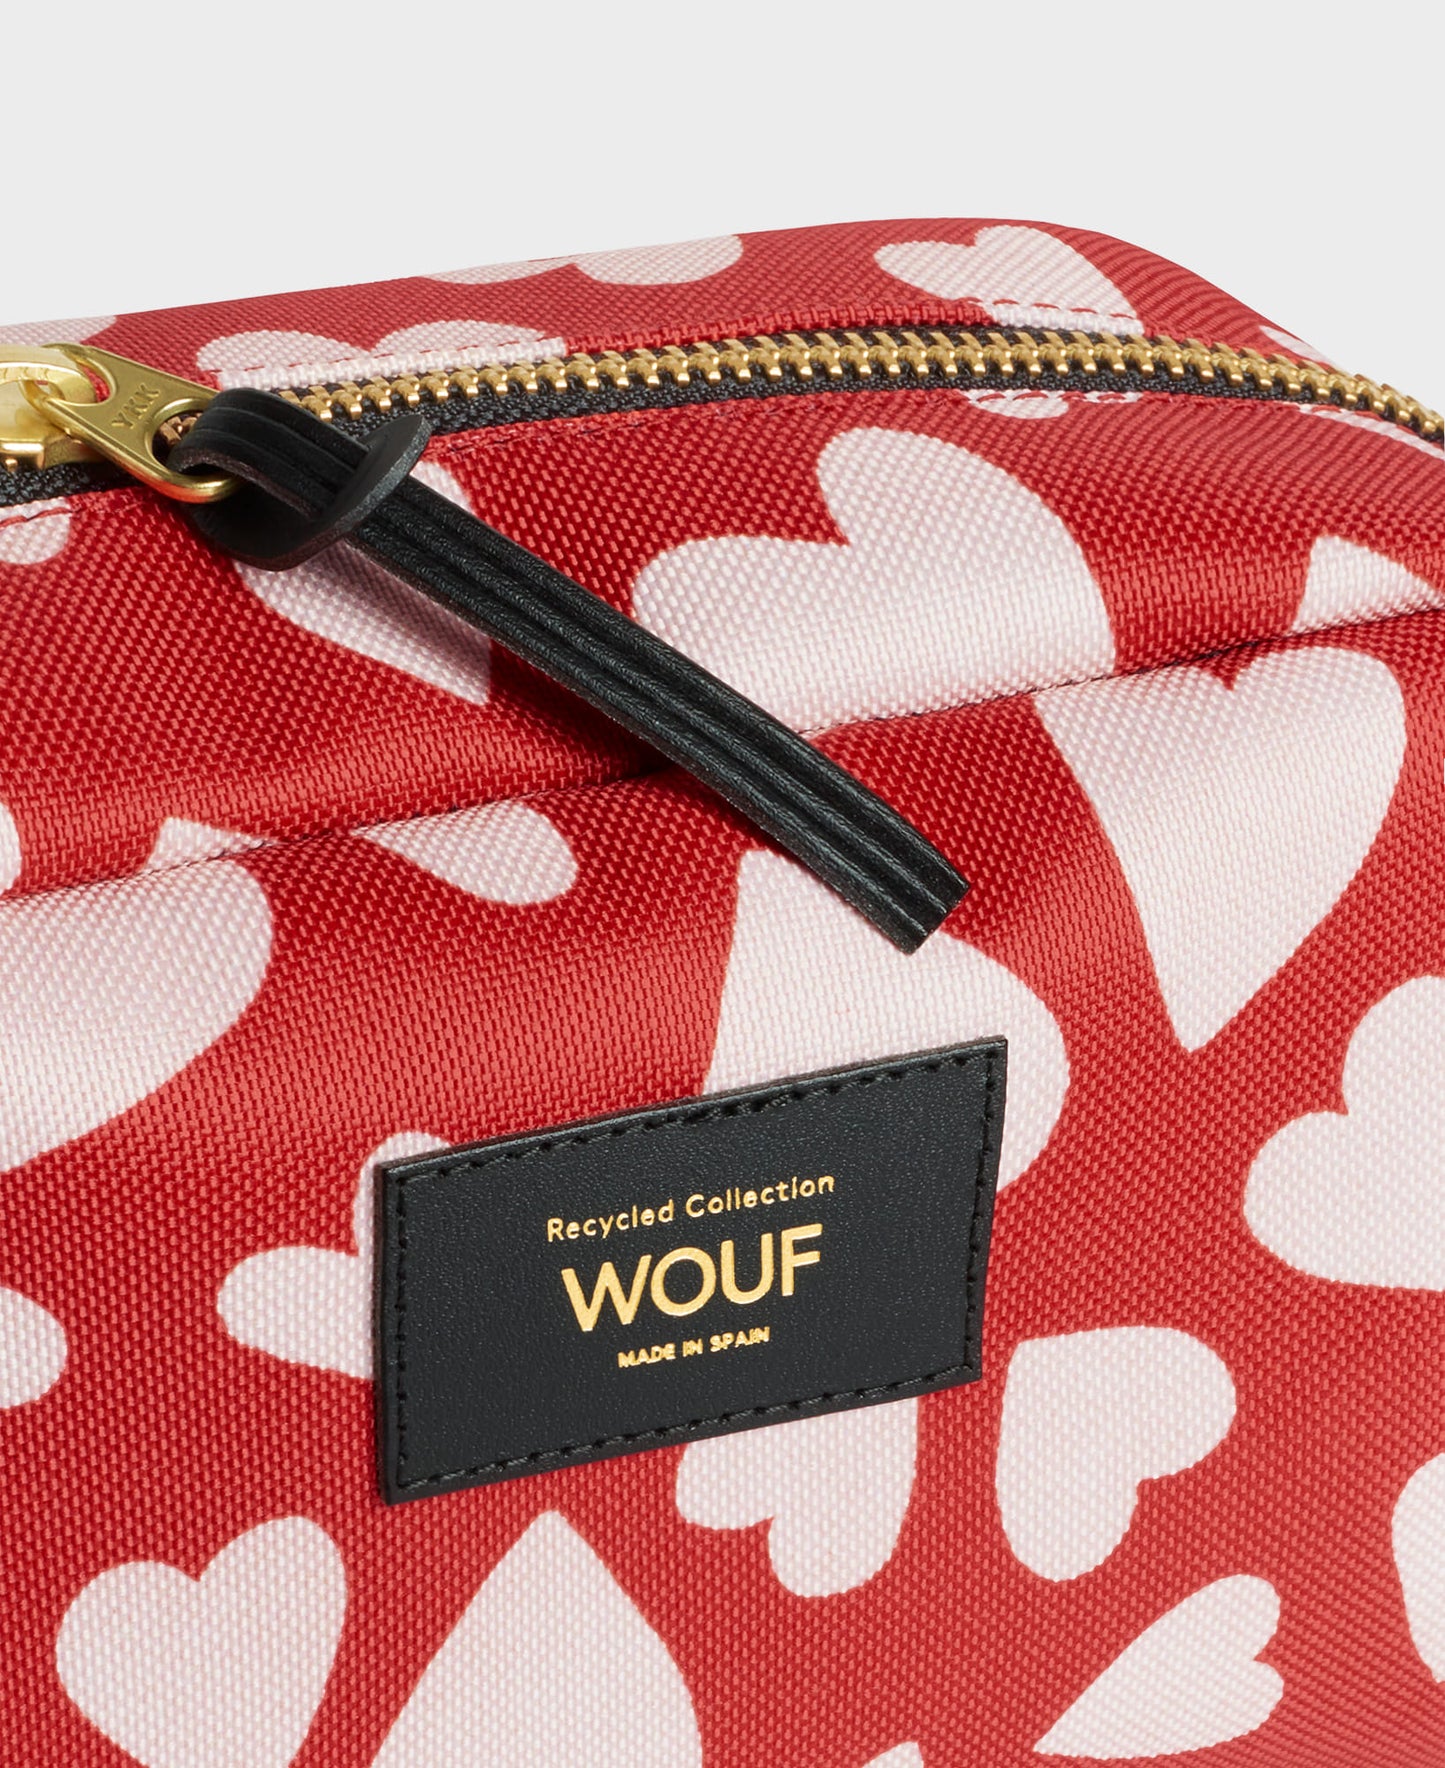 Amore Toiletry Bag